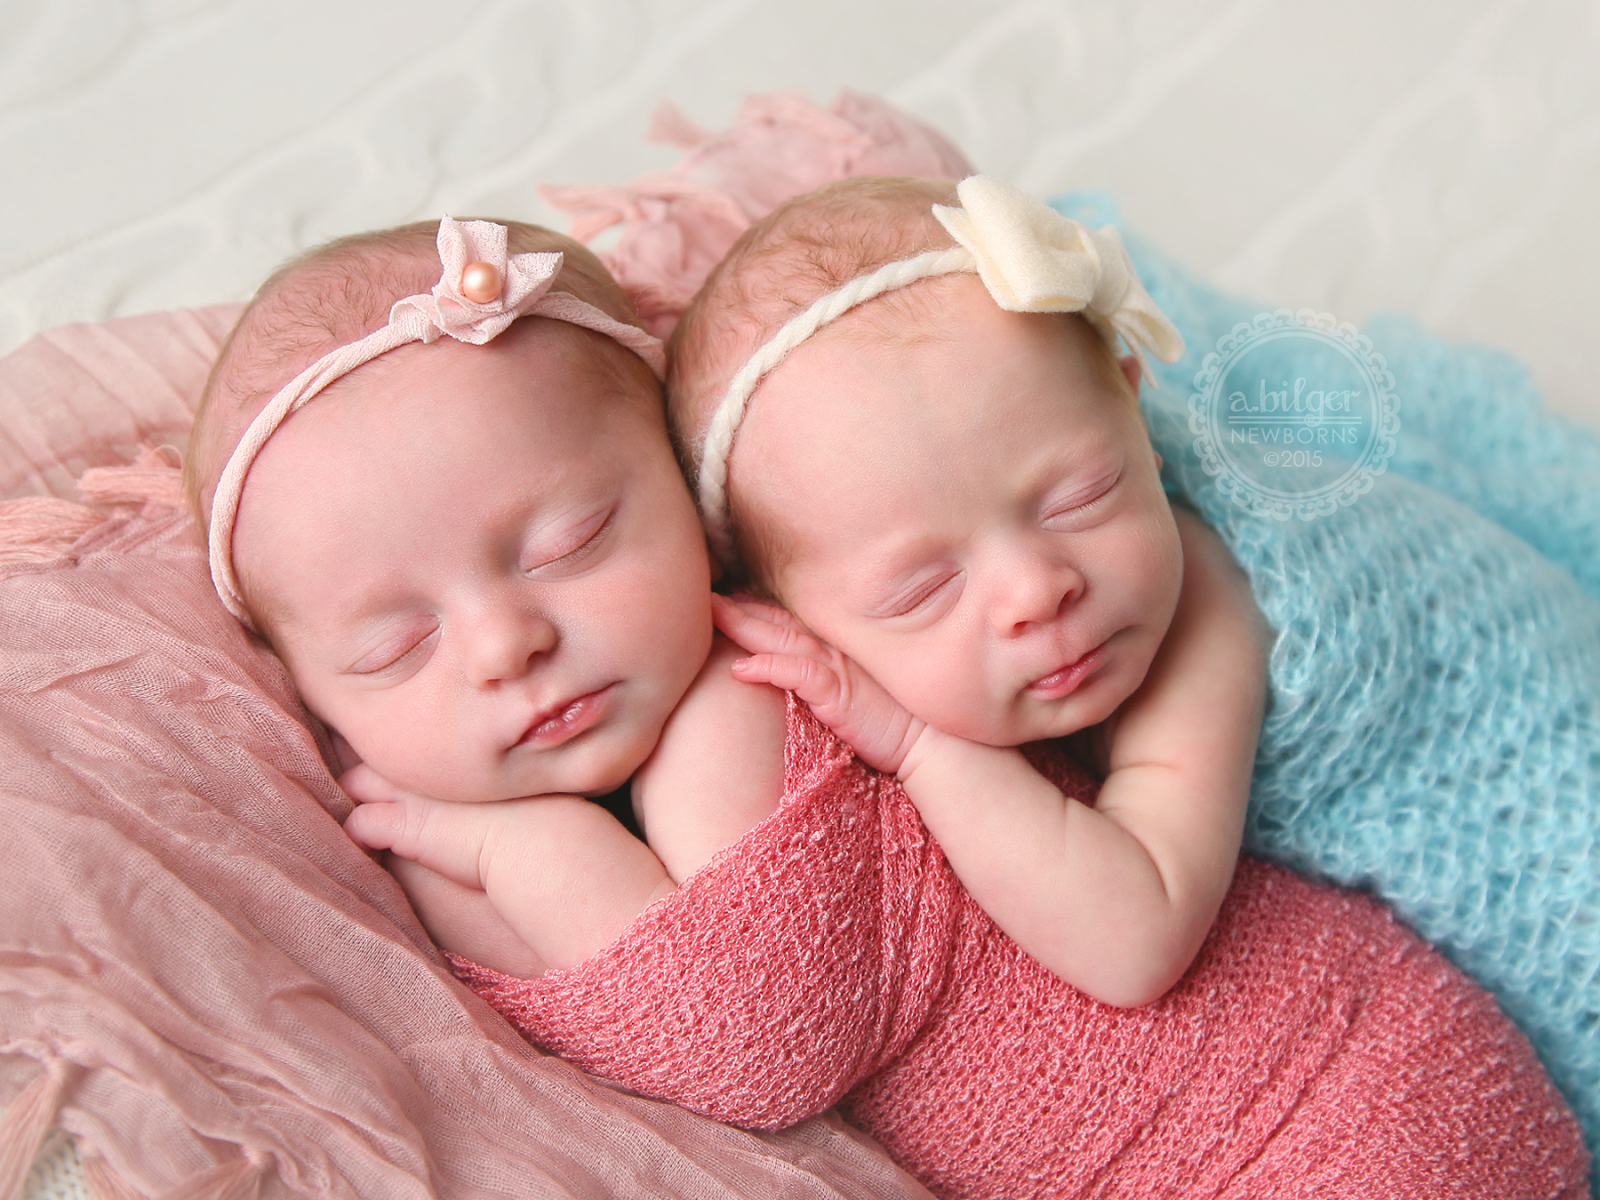 Cute Twins Baby Picture Wallpapertwicemembersprofile.blogspot.com